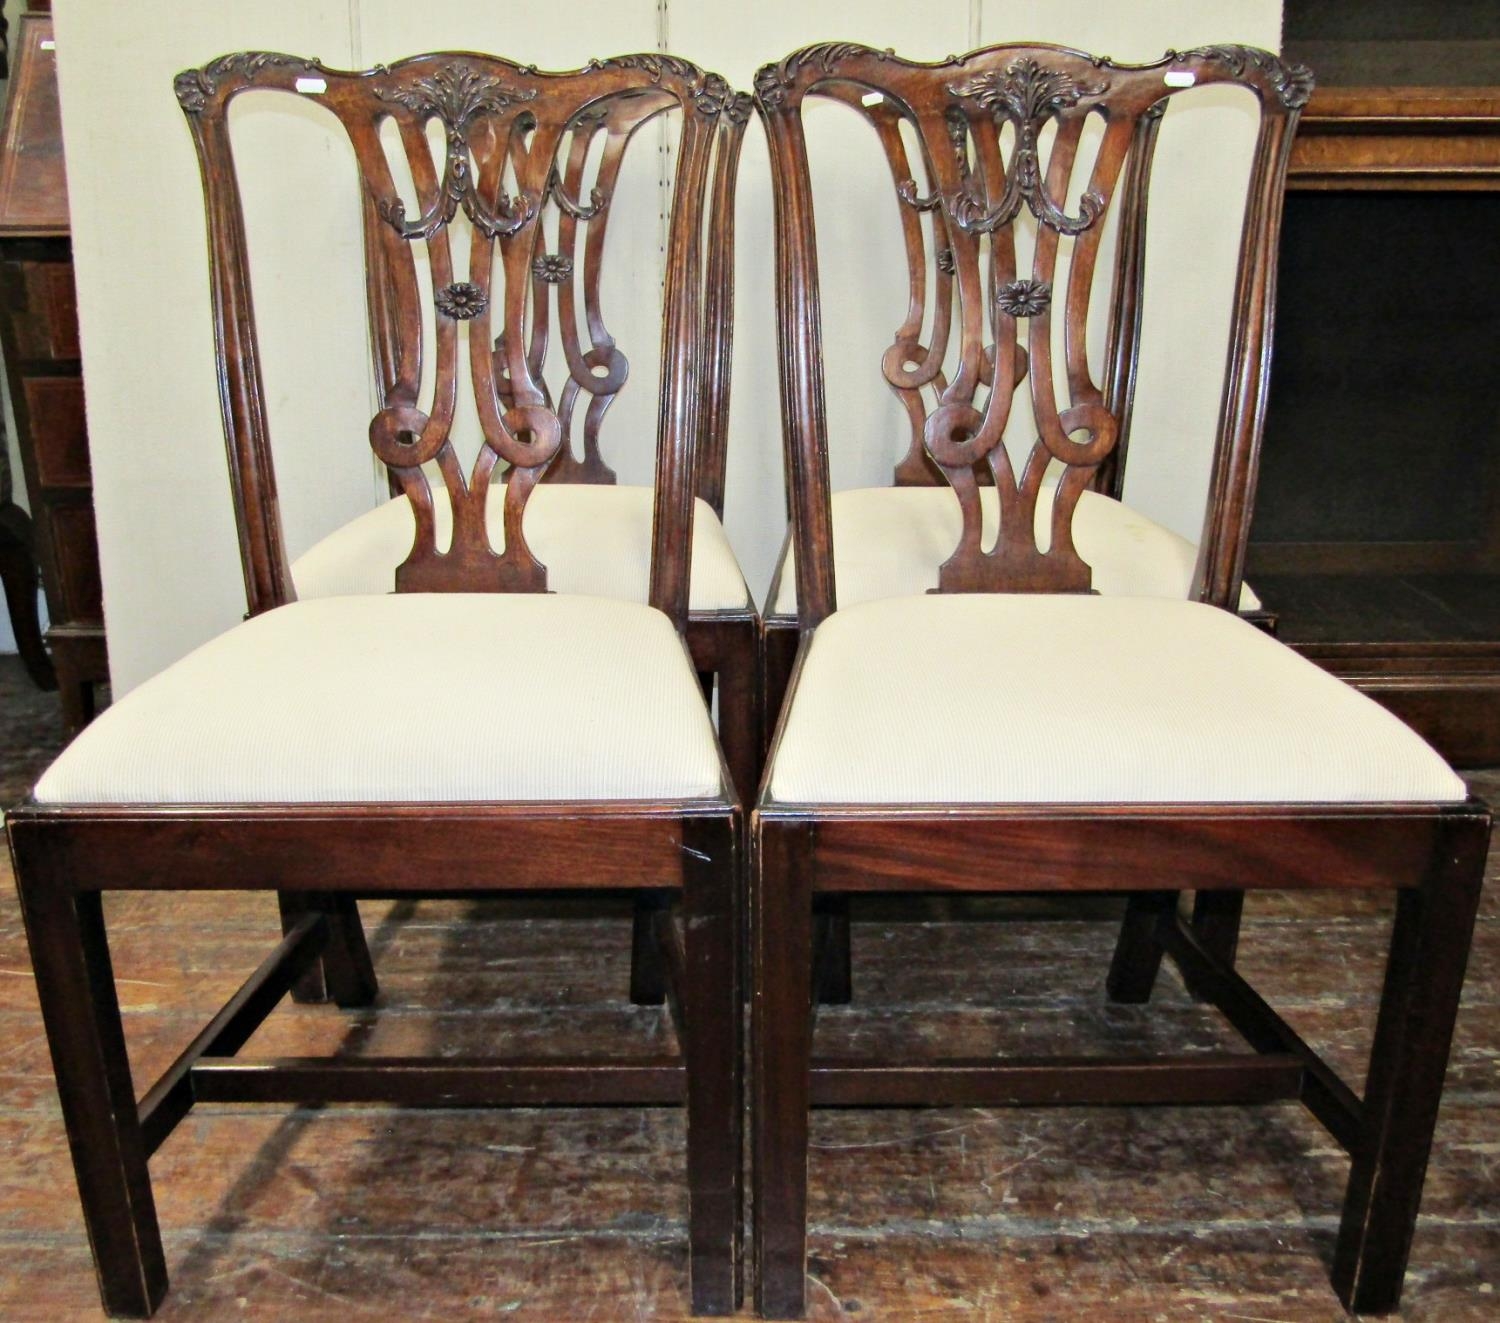 A set of six (2+4) good quality mahogany dining chairs with carved and pierced splats, set beneath